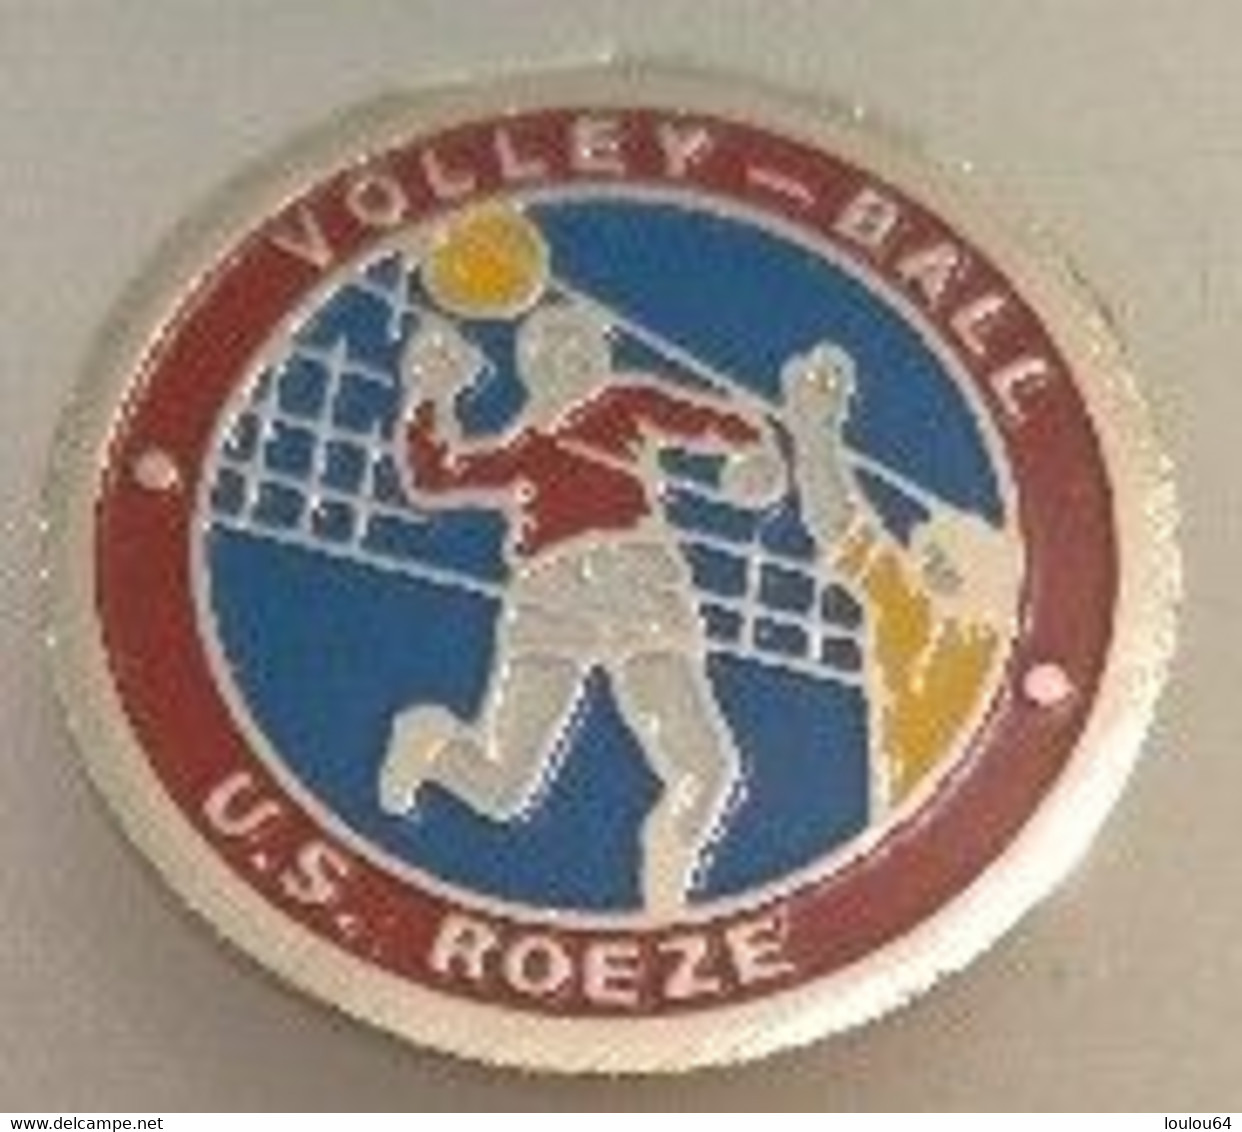 Pin's - Sports - Volleyball - U.S. ROEZE - VOLLEY-BALL - - Volleyball